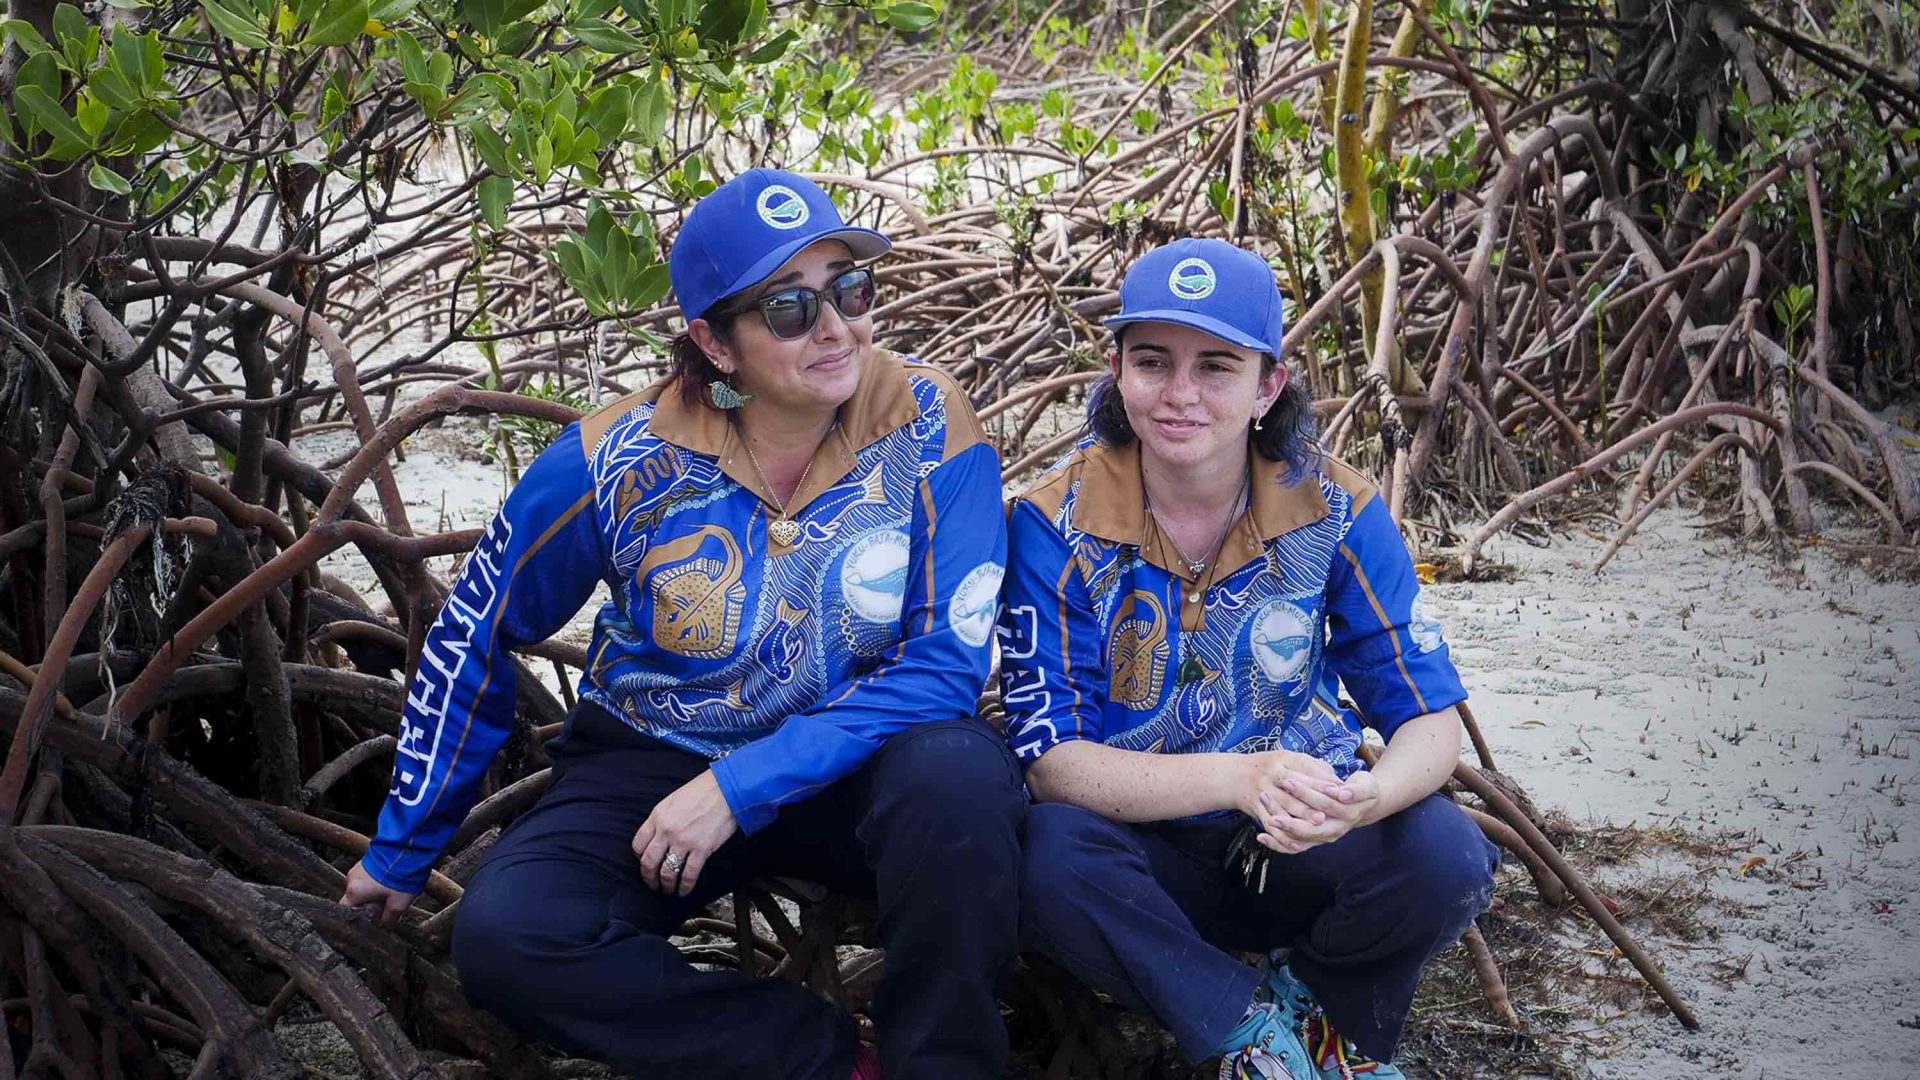 Two women in blue rangers clothing sit on a piece of wood b some mangroves.